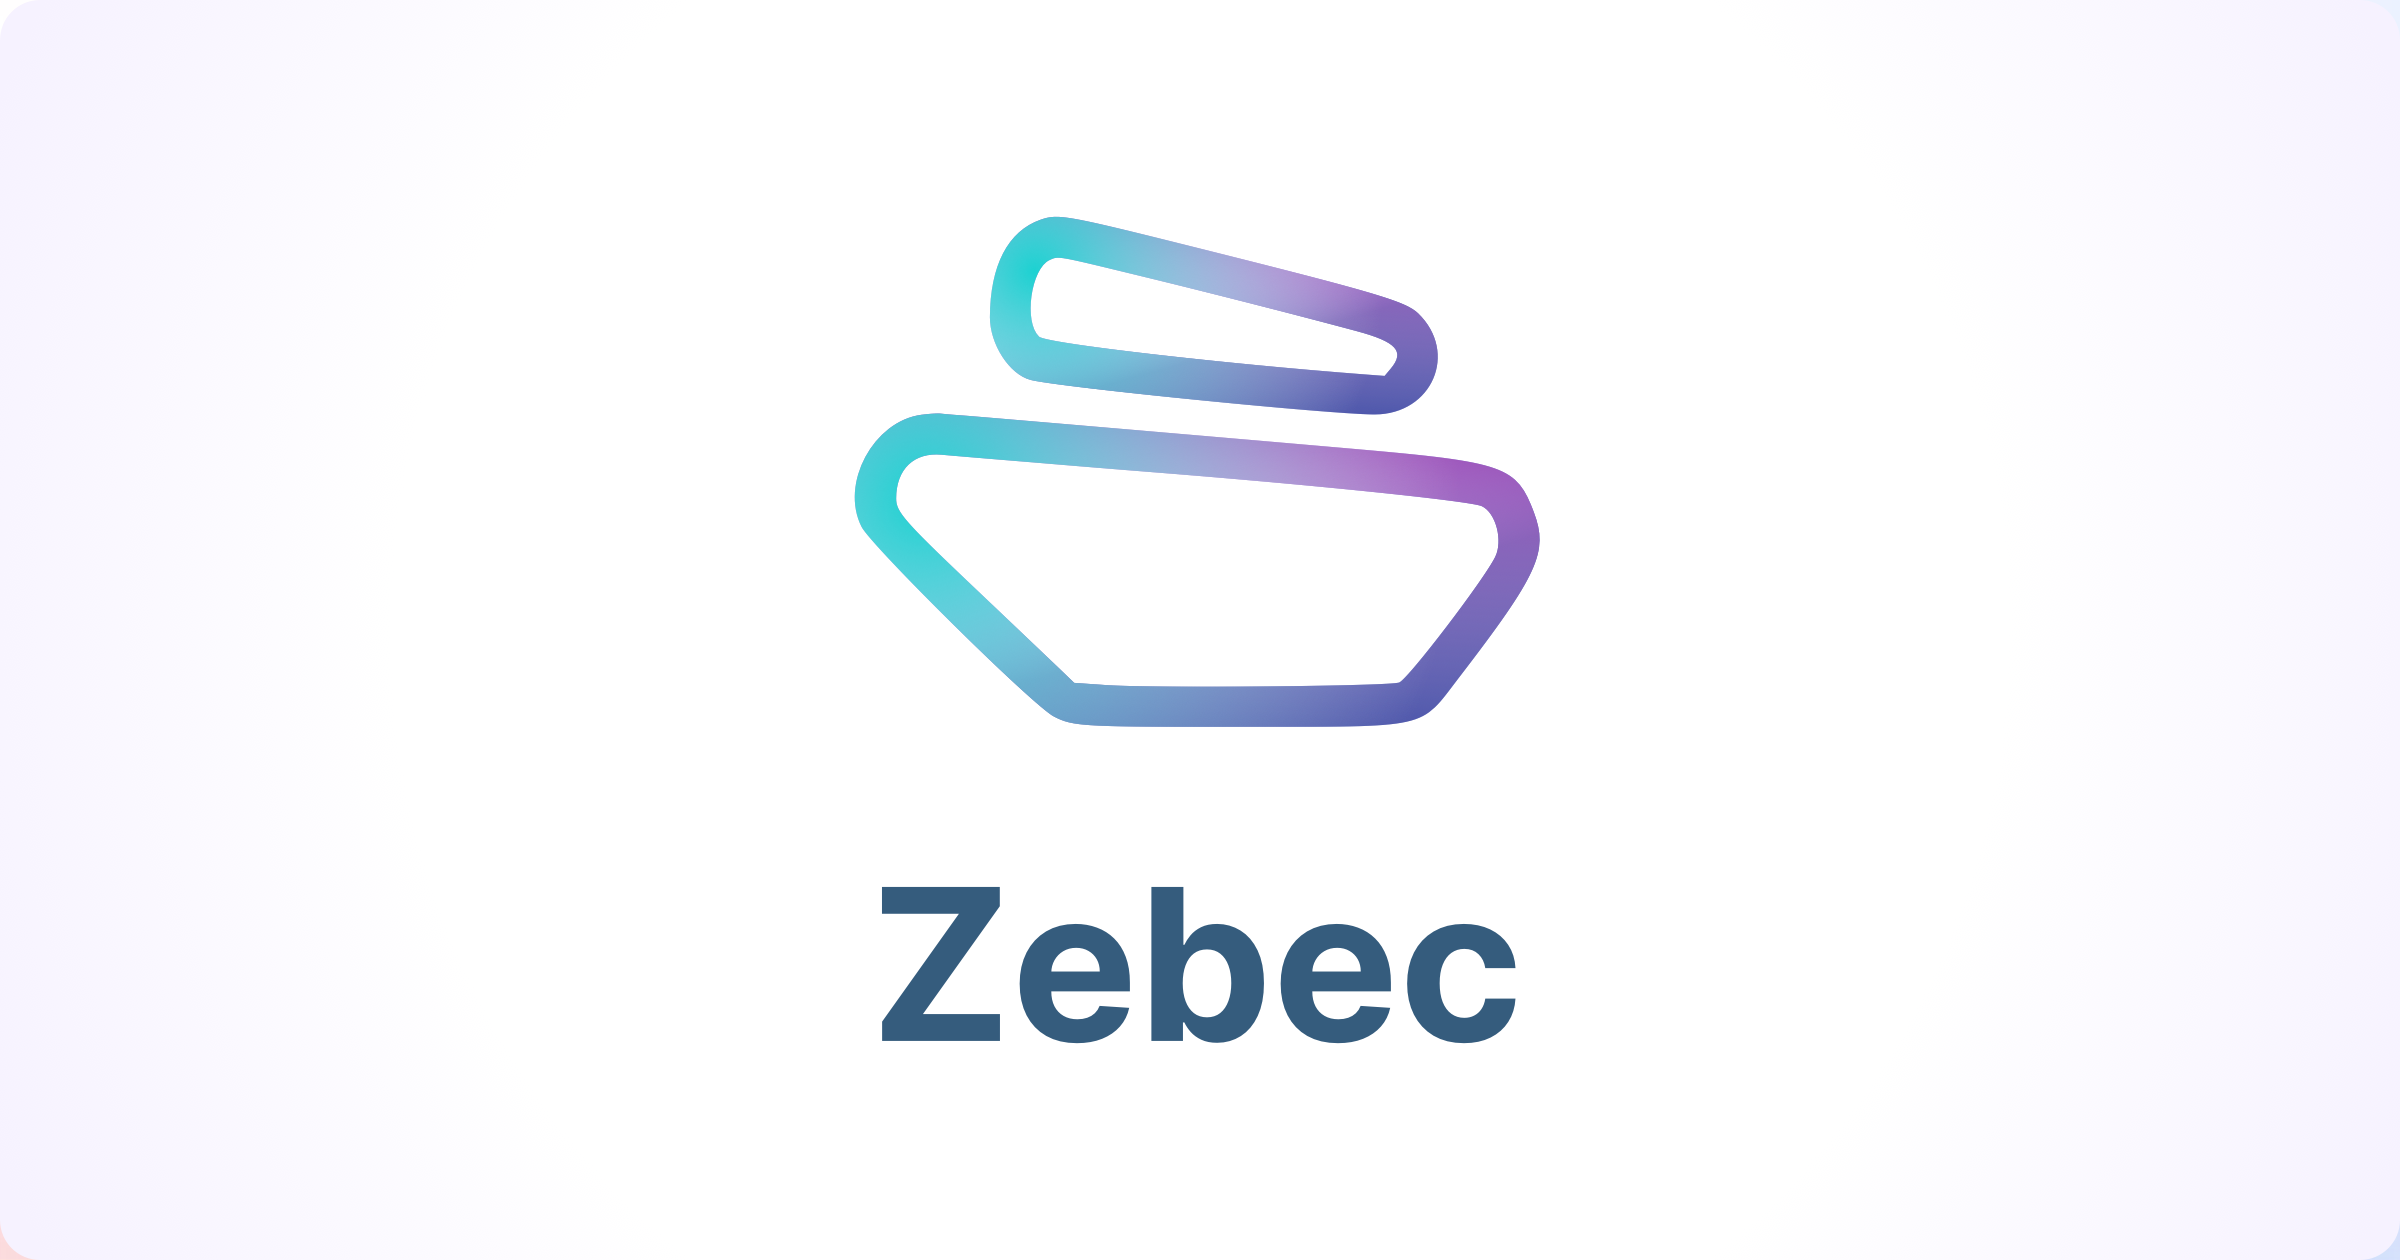 Zebec launches real-time, streaming USDC payments, with support from Circle Ventures+